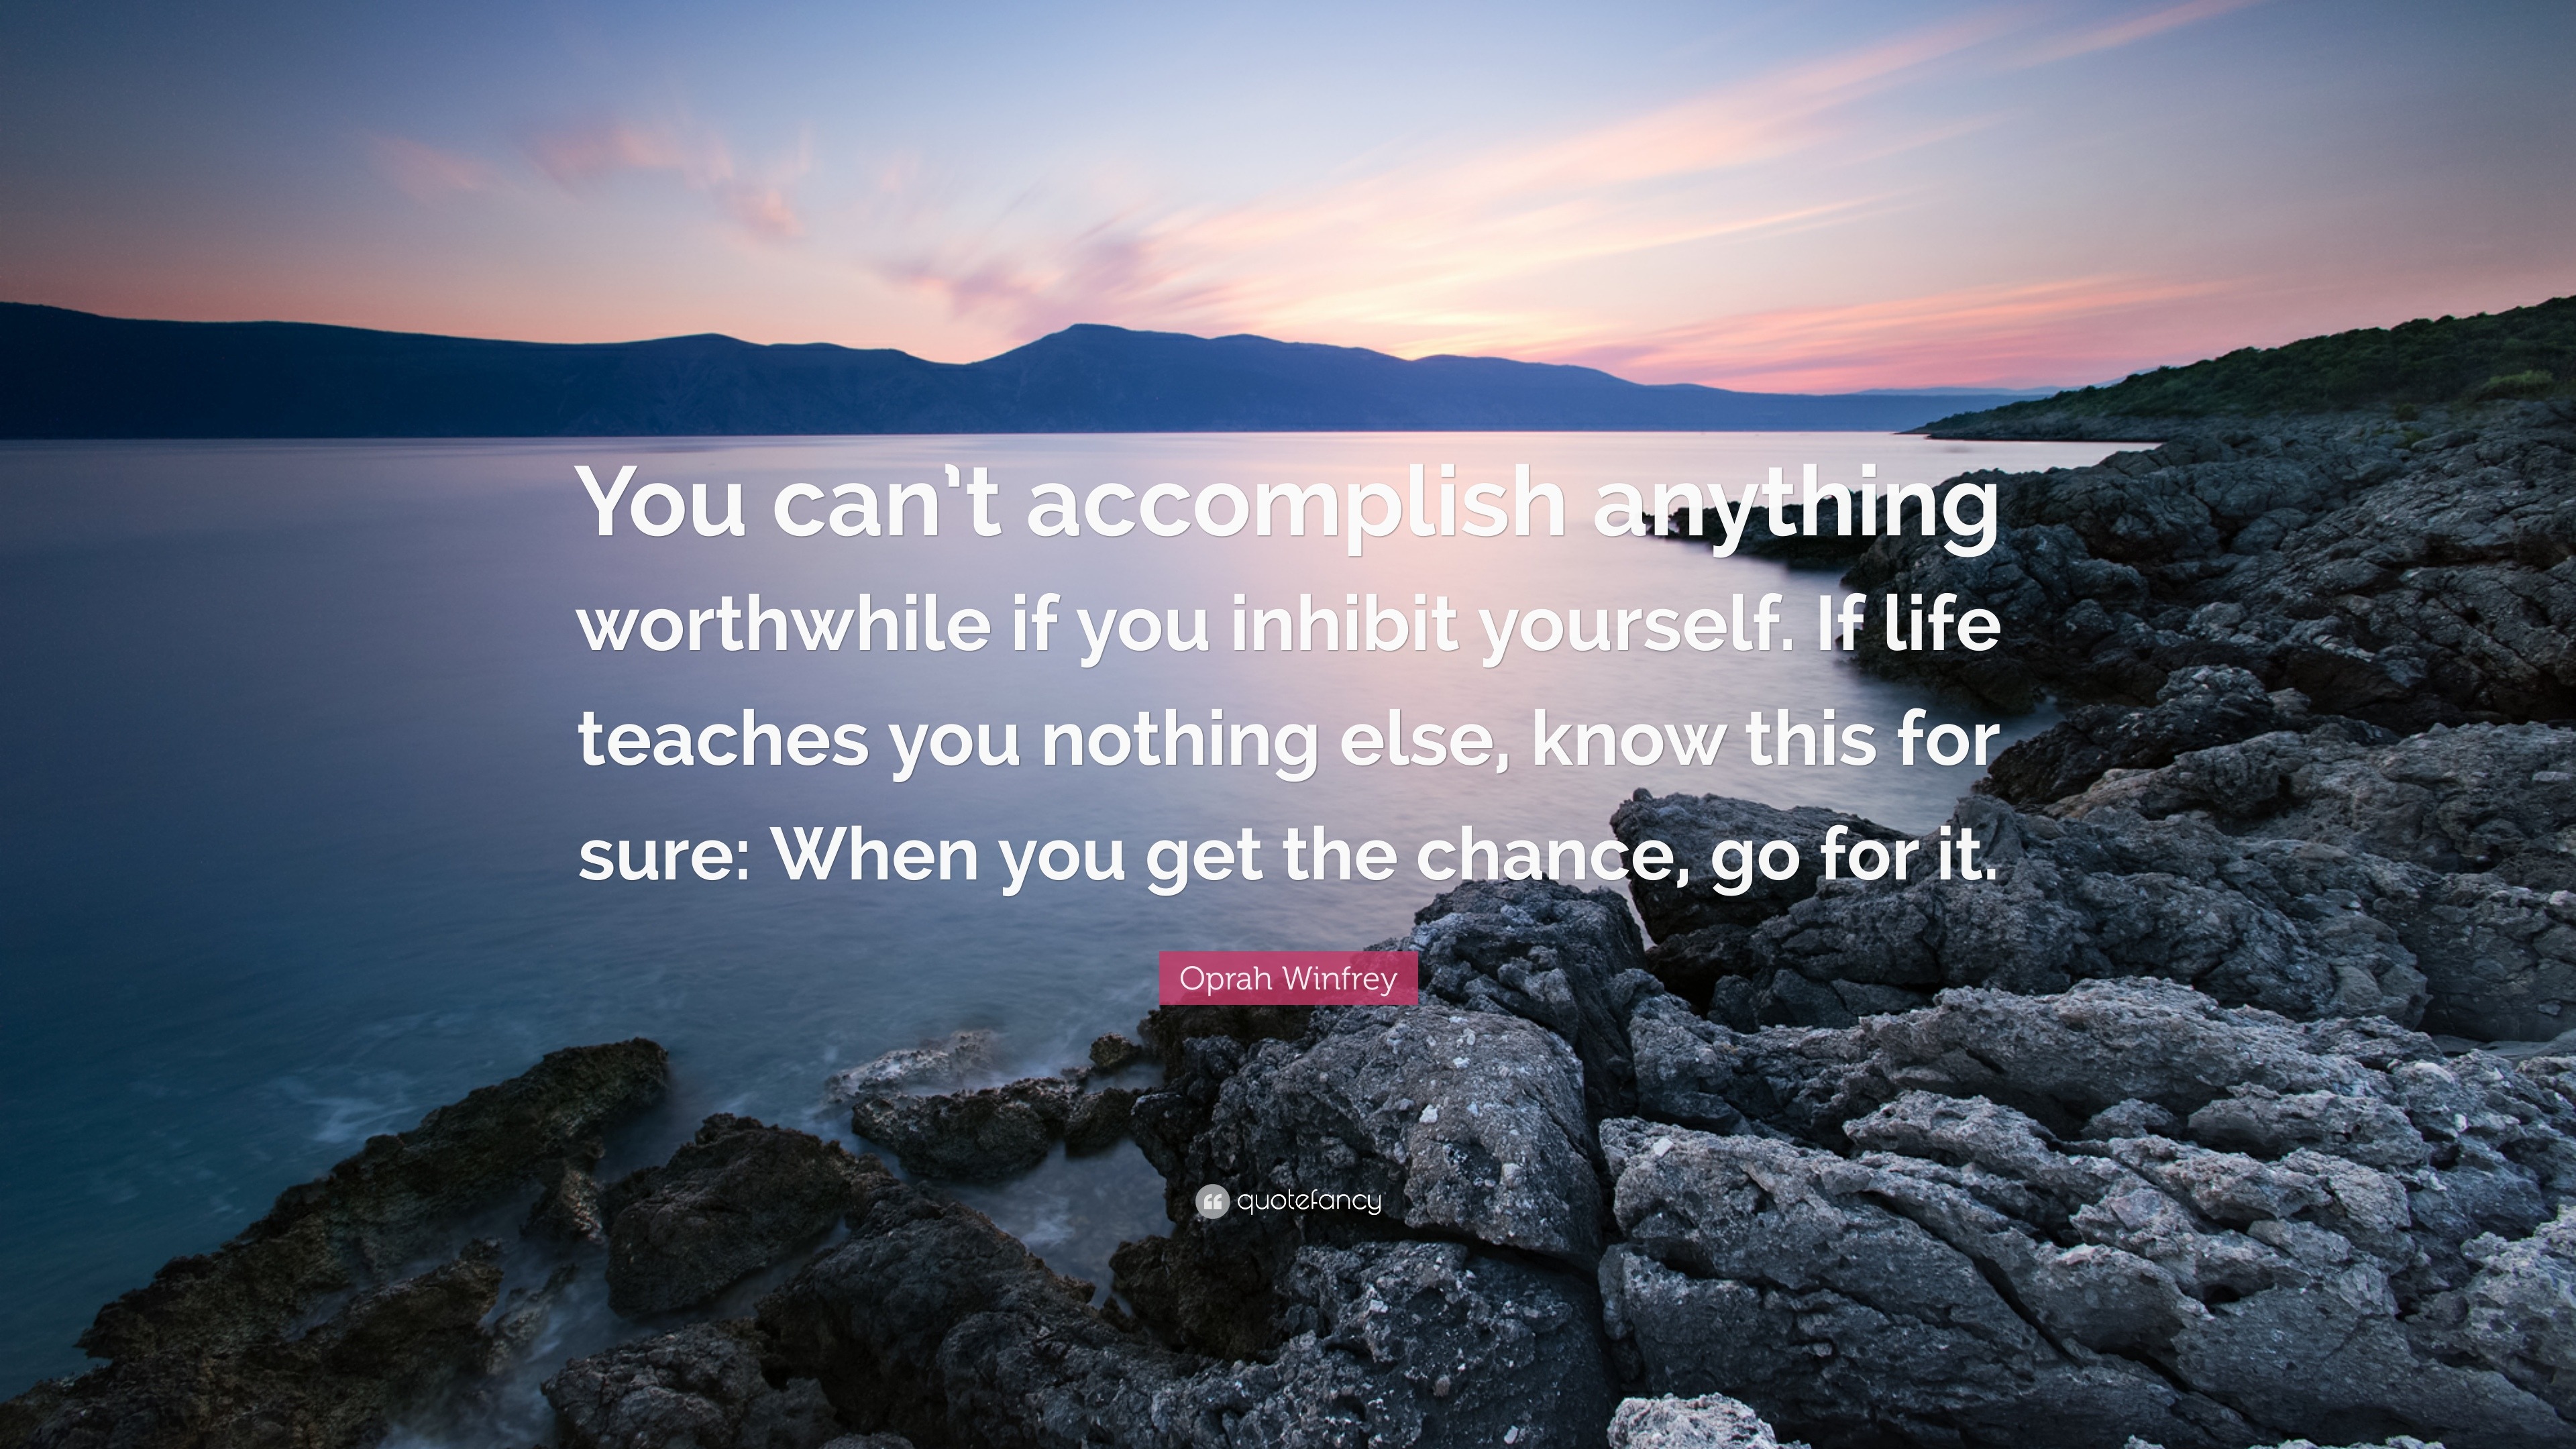 Oprah Winfrey Quote: “You can’t accomplish anything worthwhile if you ...